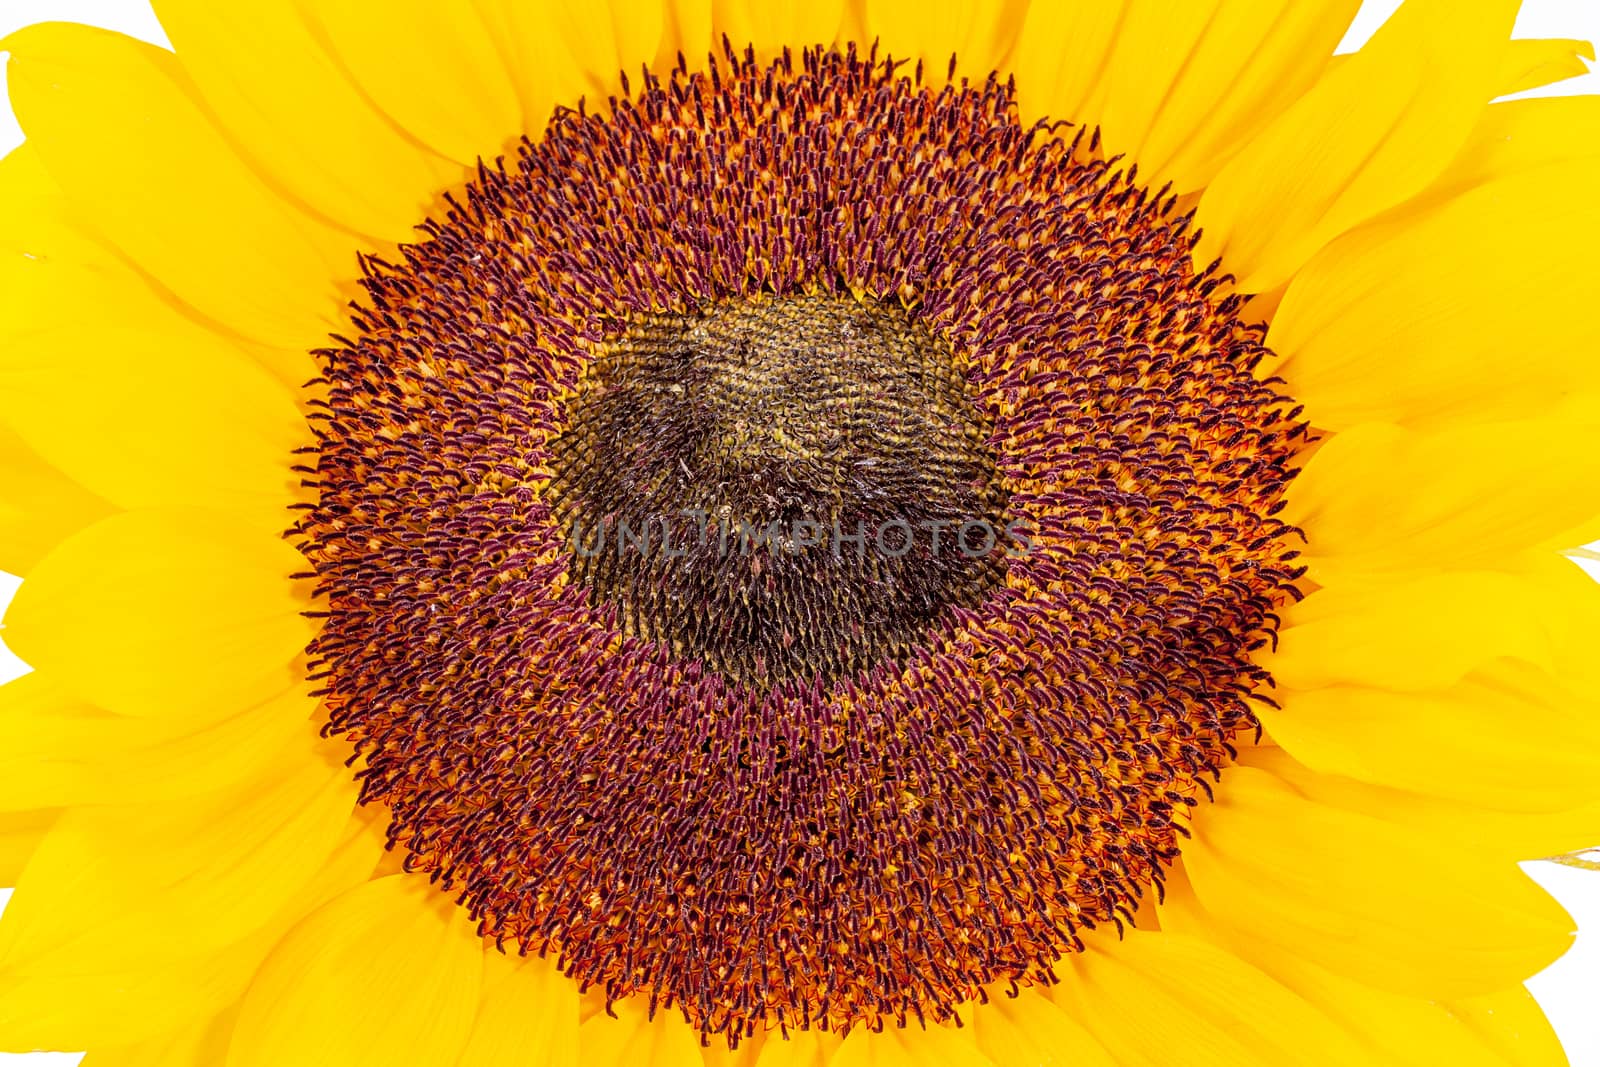 blooming sunflower on white background, close up.